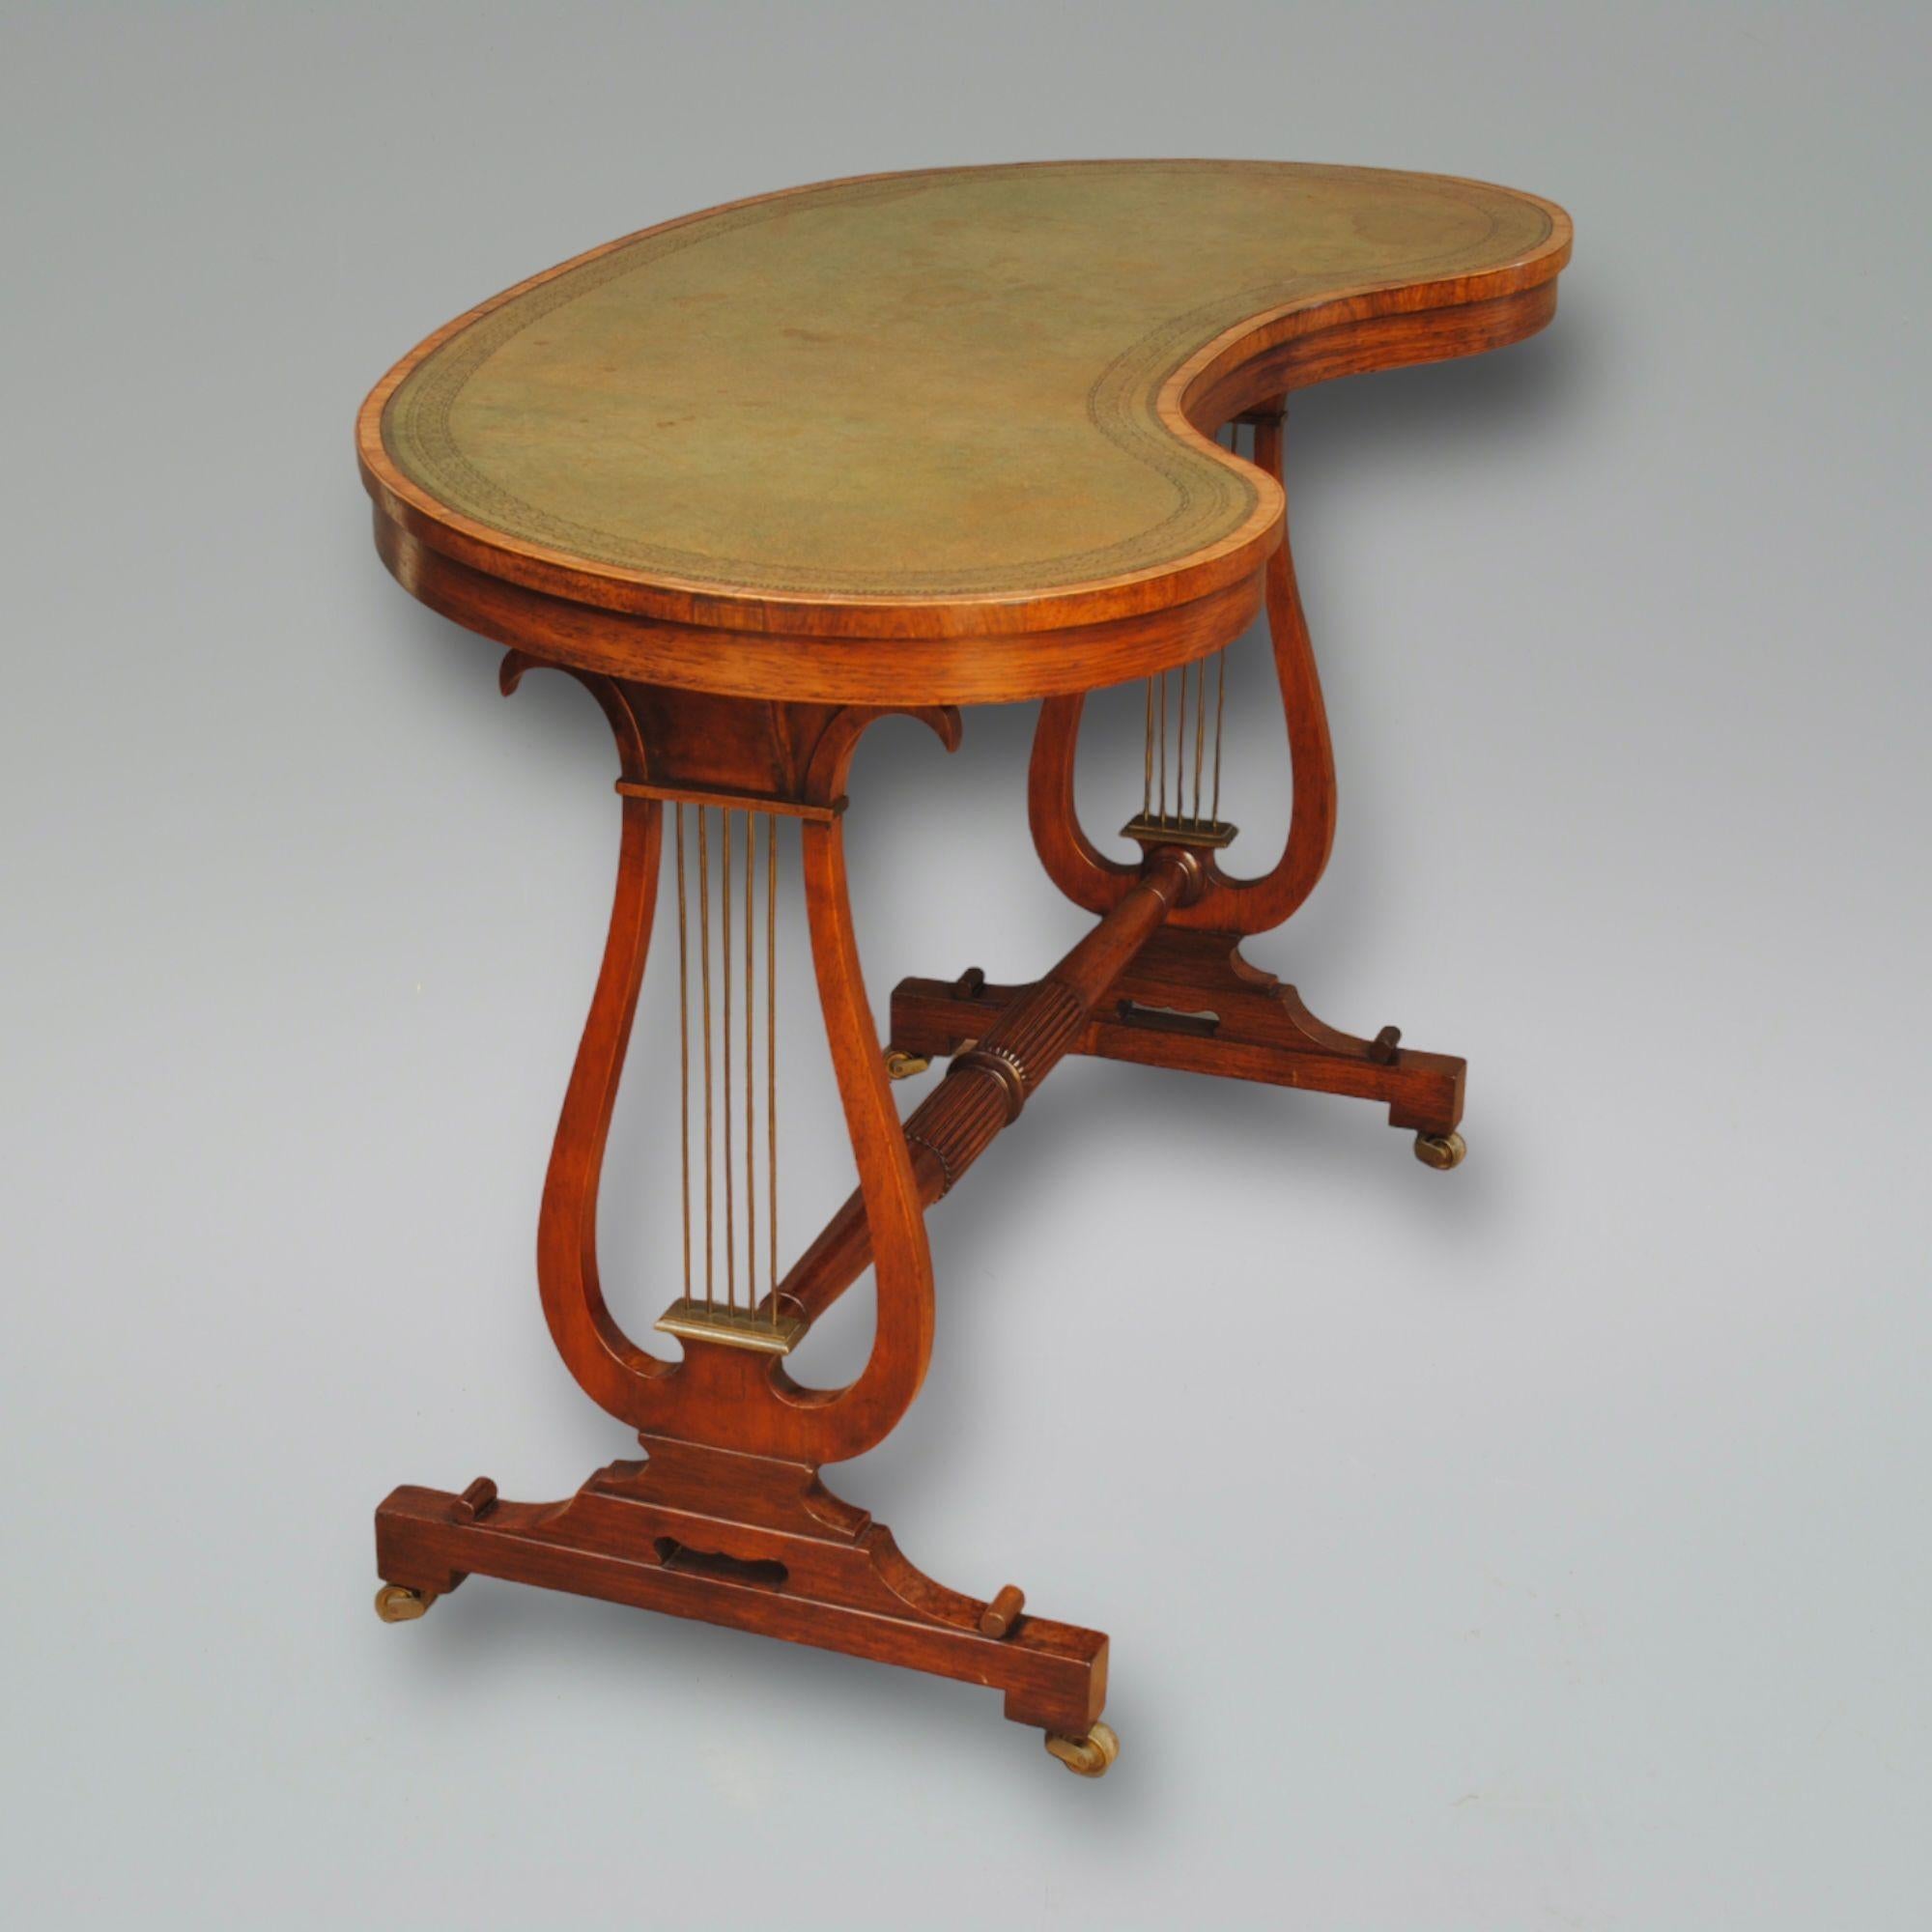 A regency period rosewood lyre eneded kidney shaped writing table, with brass lyres and leathered top.